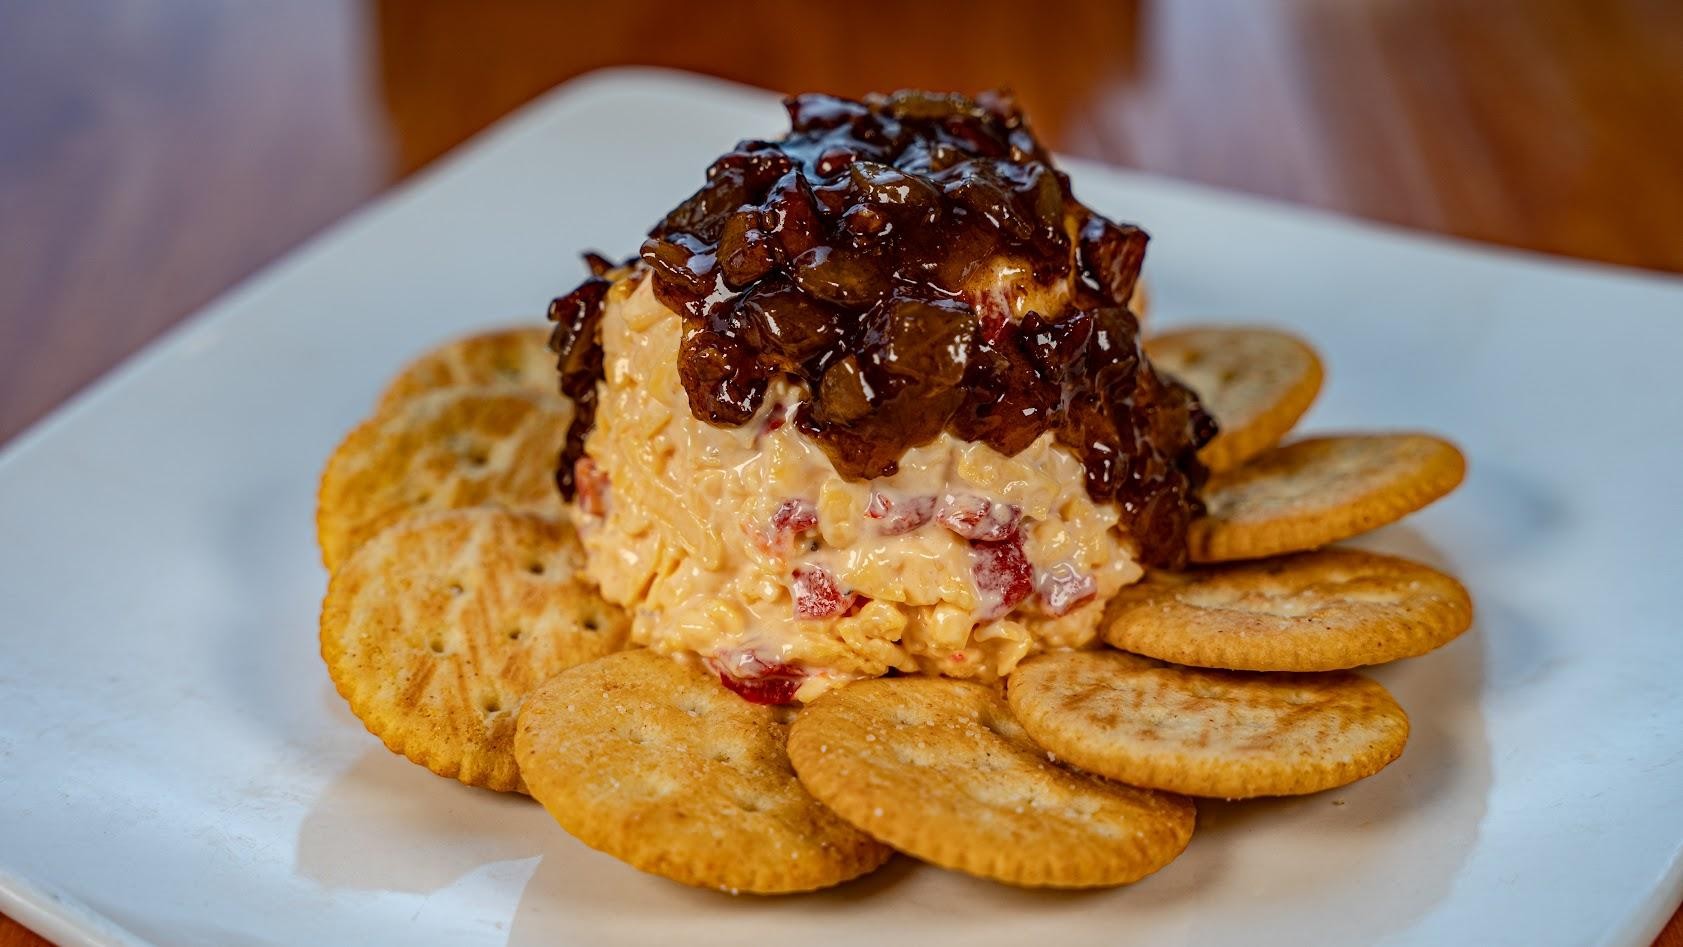 Pimiento Cheese and Crackers